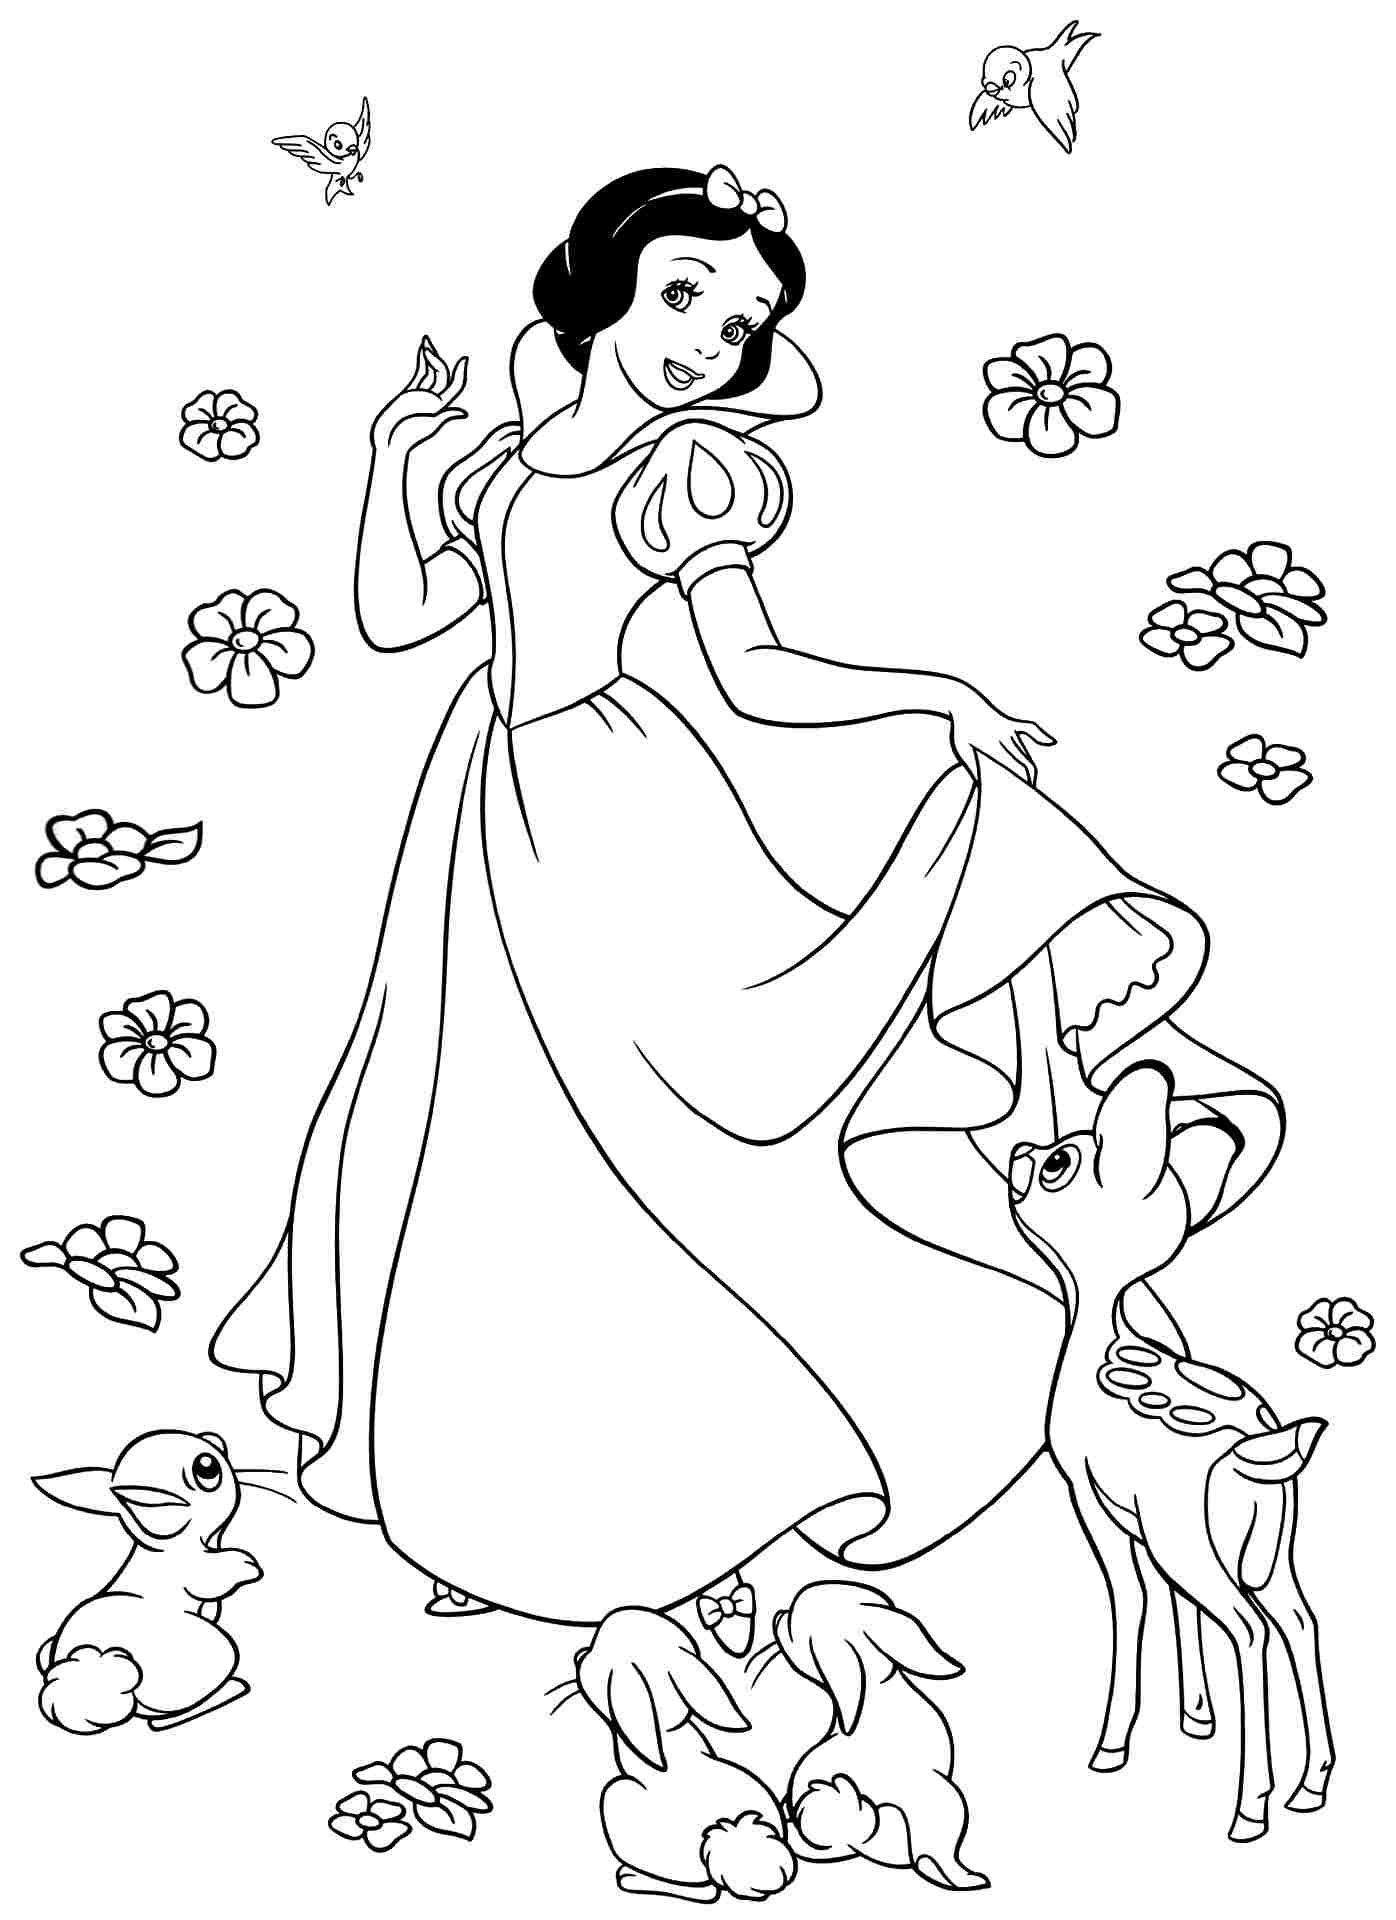 Download Snow White Coloring Pages - Best Coloring Pages For Kids